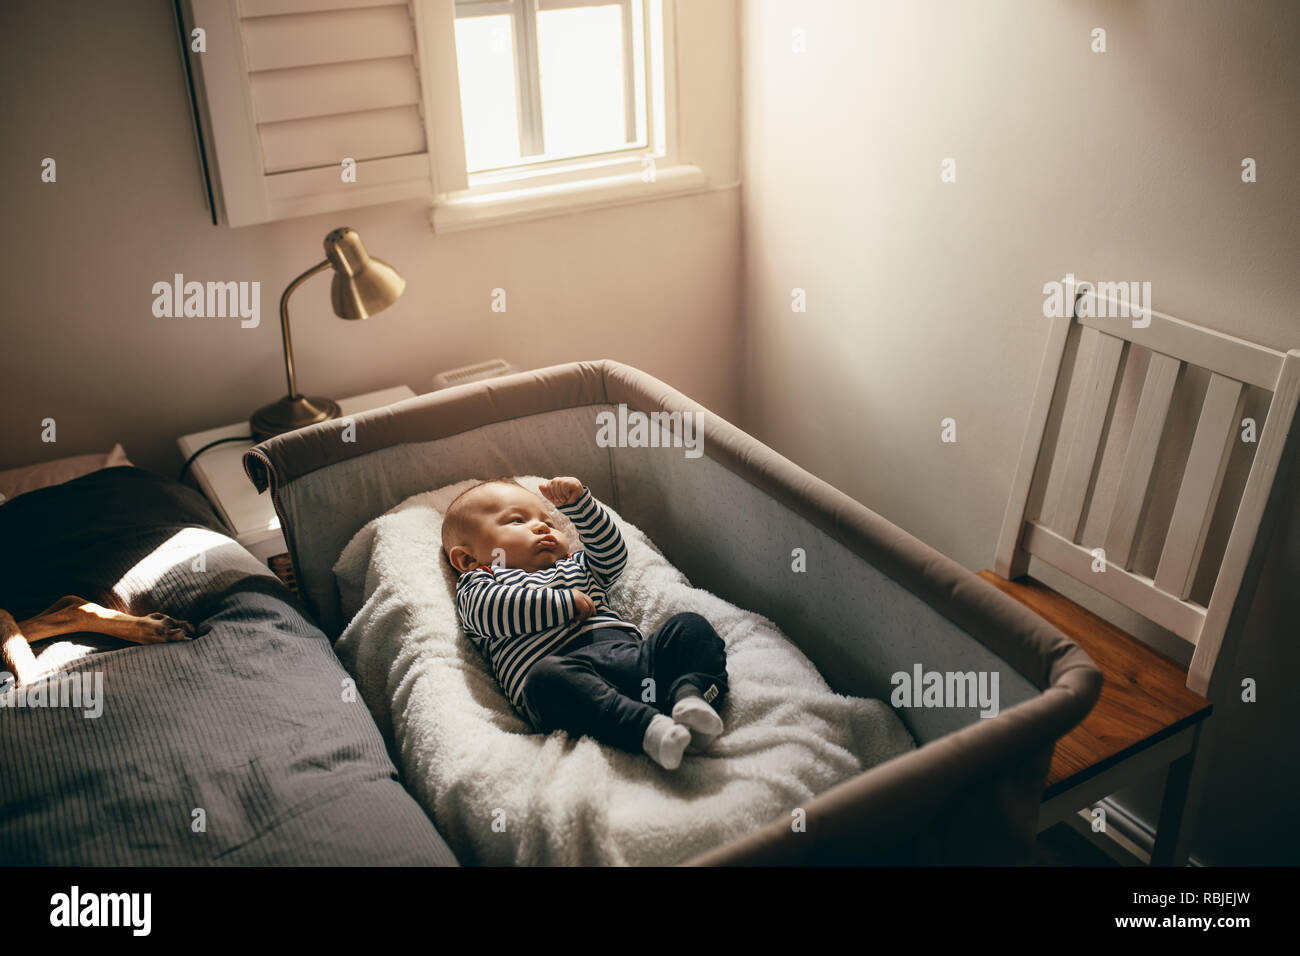 Baby sleeping in a bedside bassinet in bedroom. Infant lying on a crib moving his hands and legs. Stock Photo